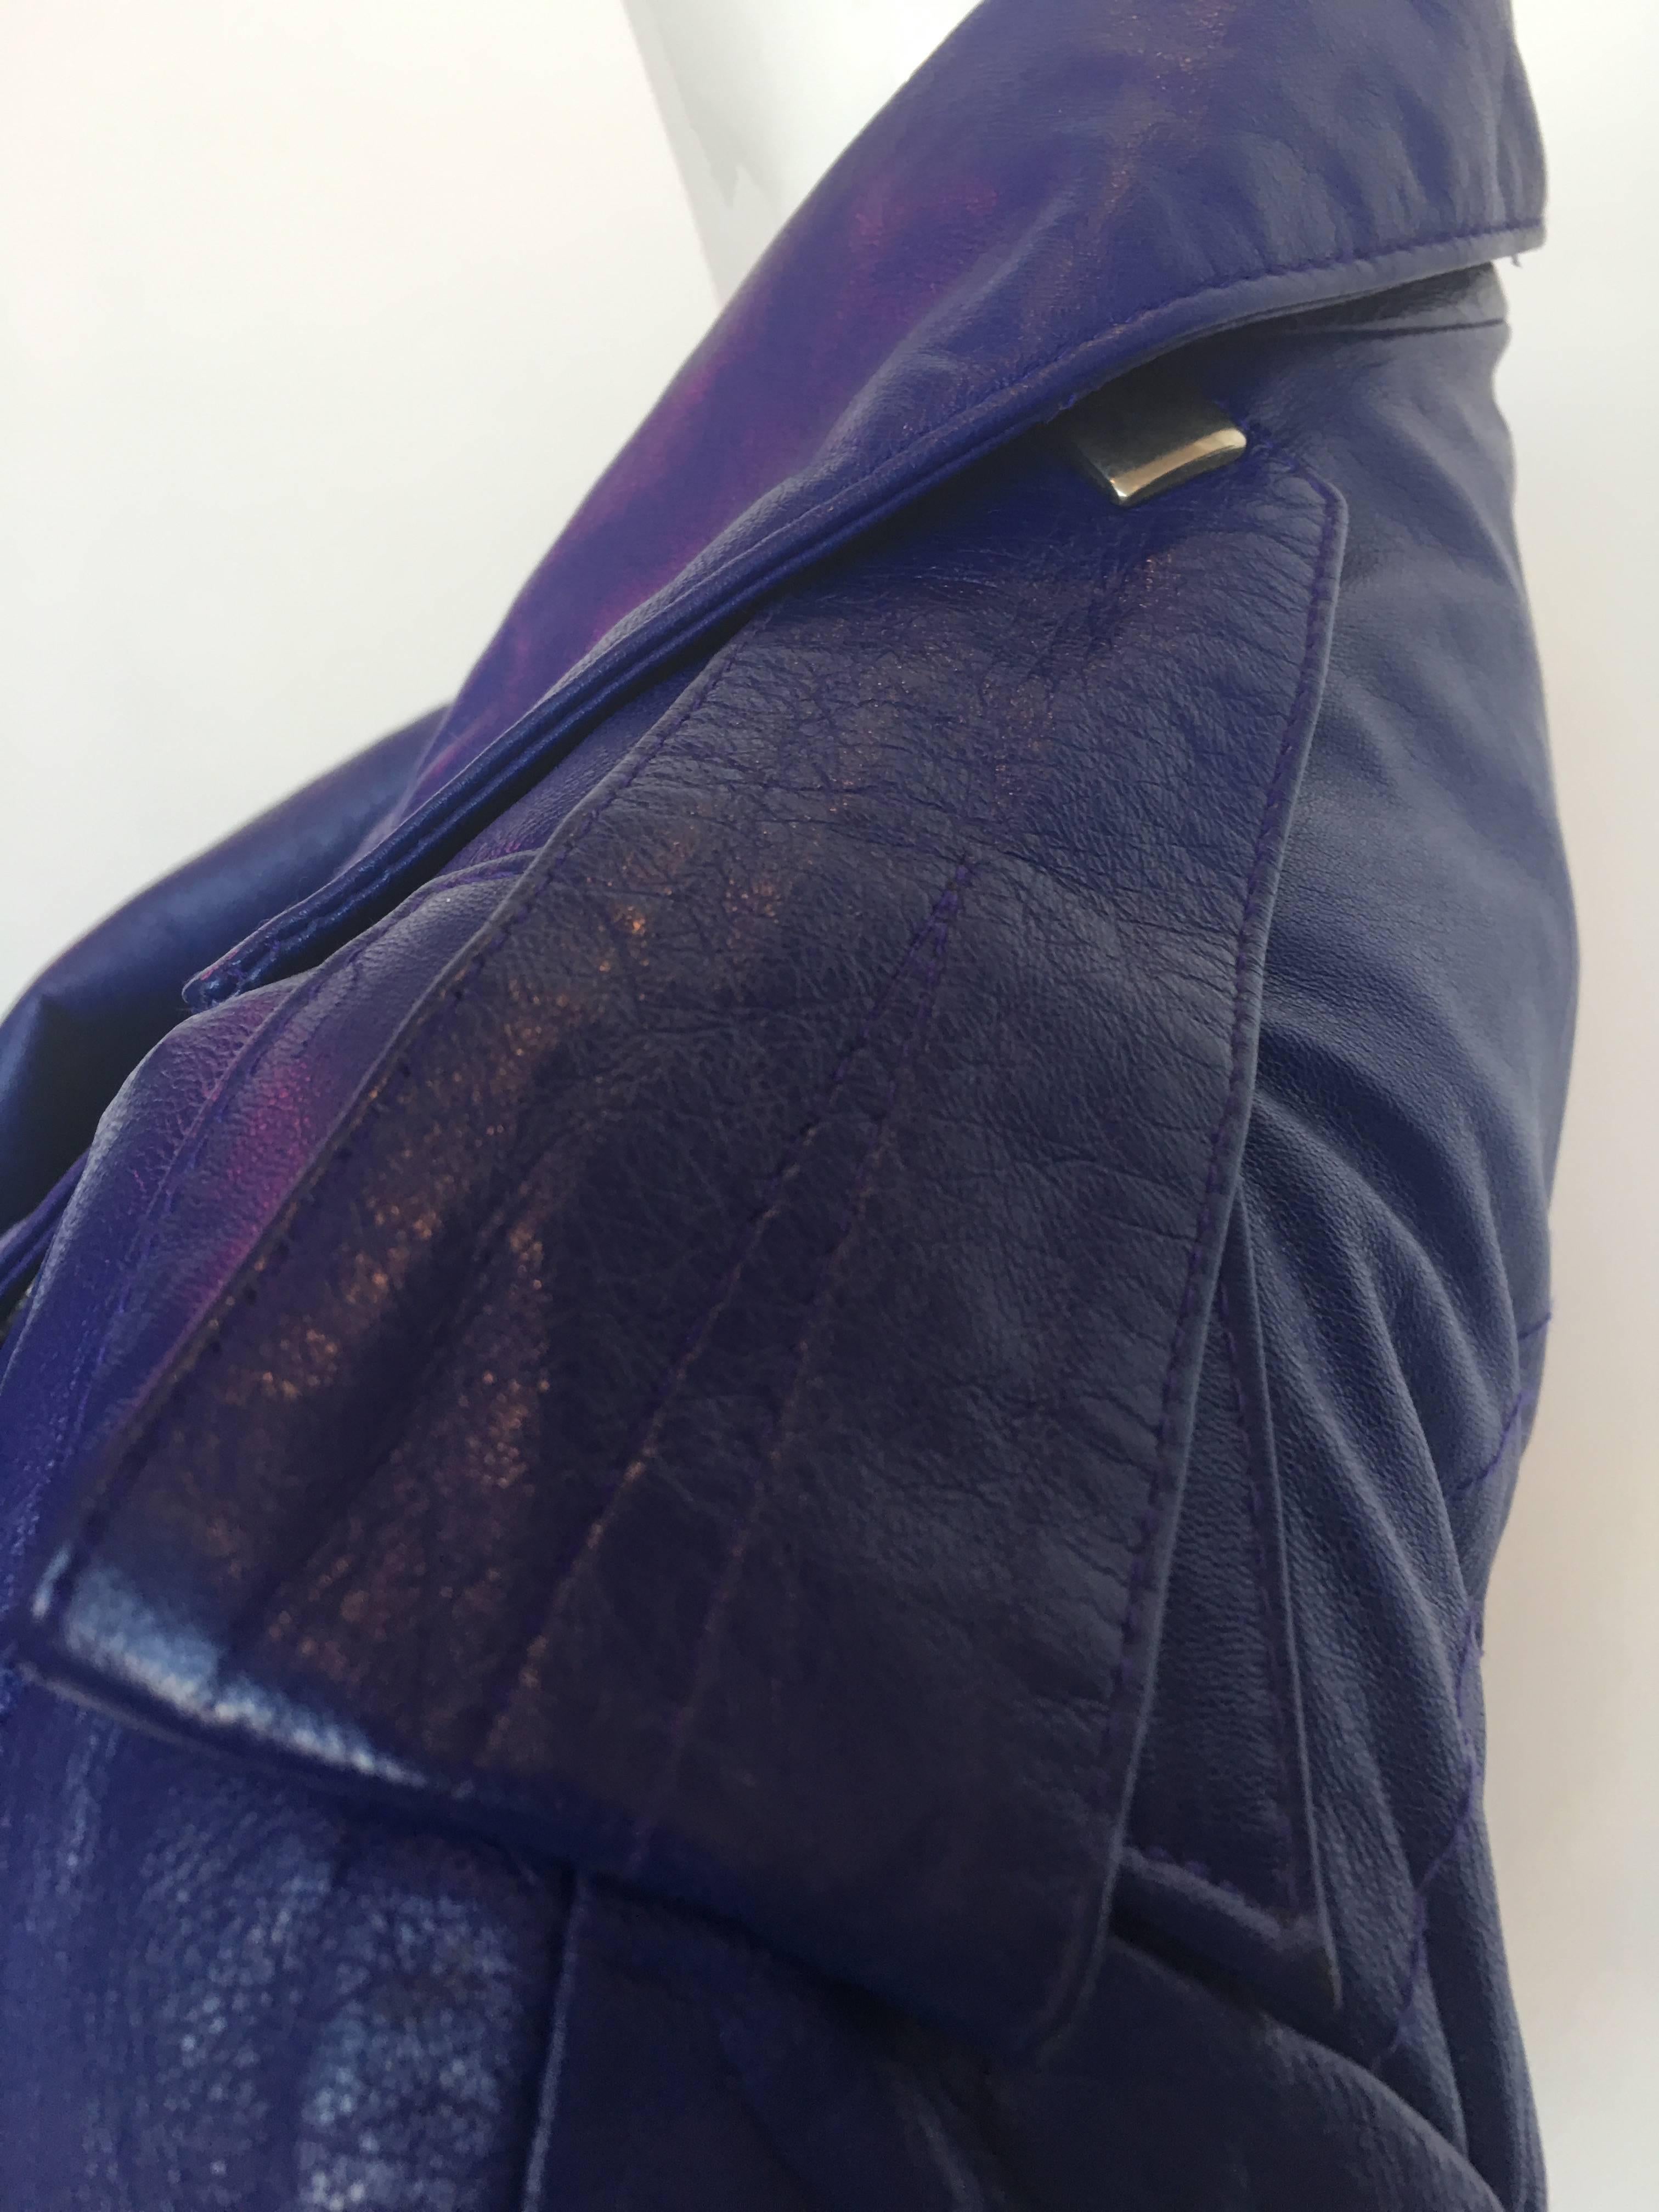 Women's or Men's Michael Hoban North Beach Leather Purple / Blue Moto Dress with Zippers, 1980s  For Sale